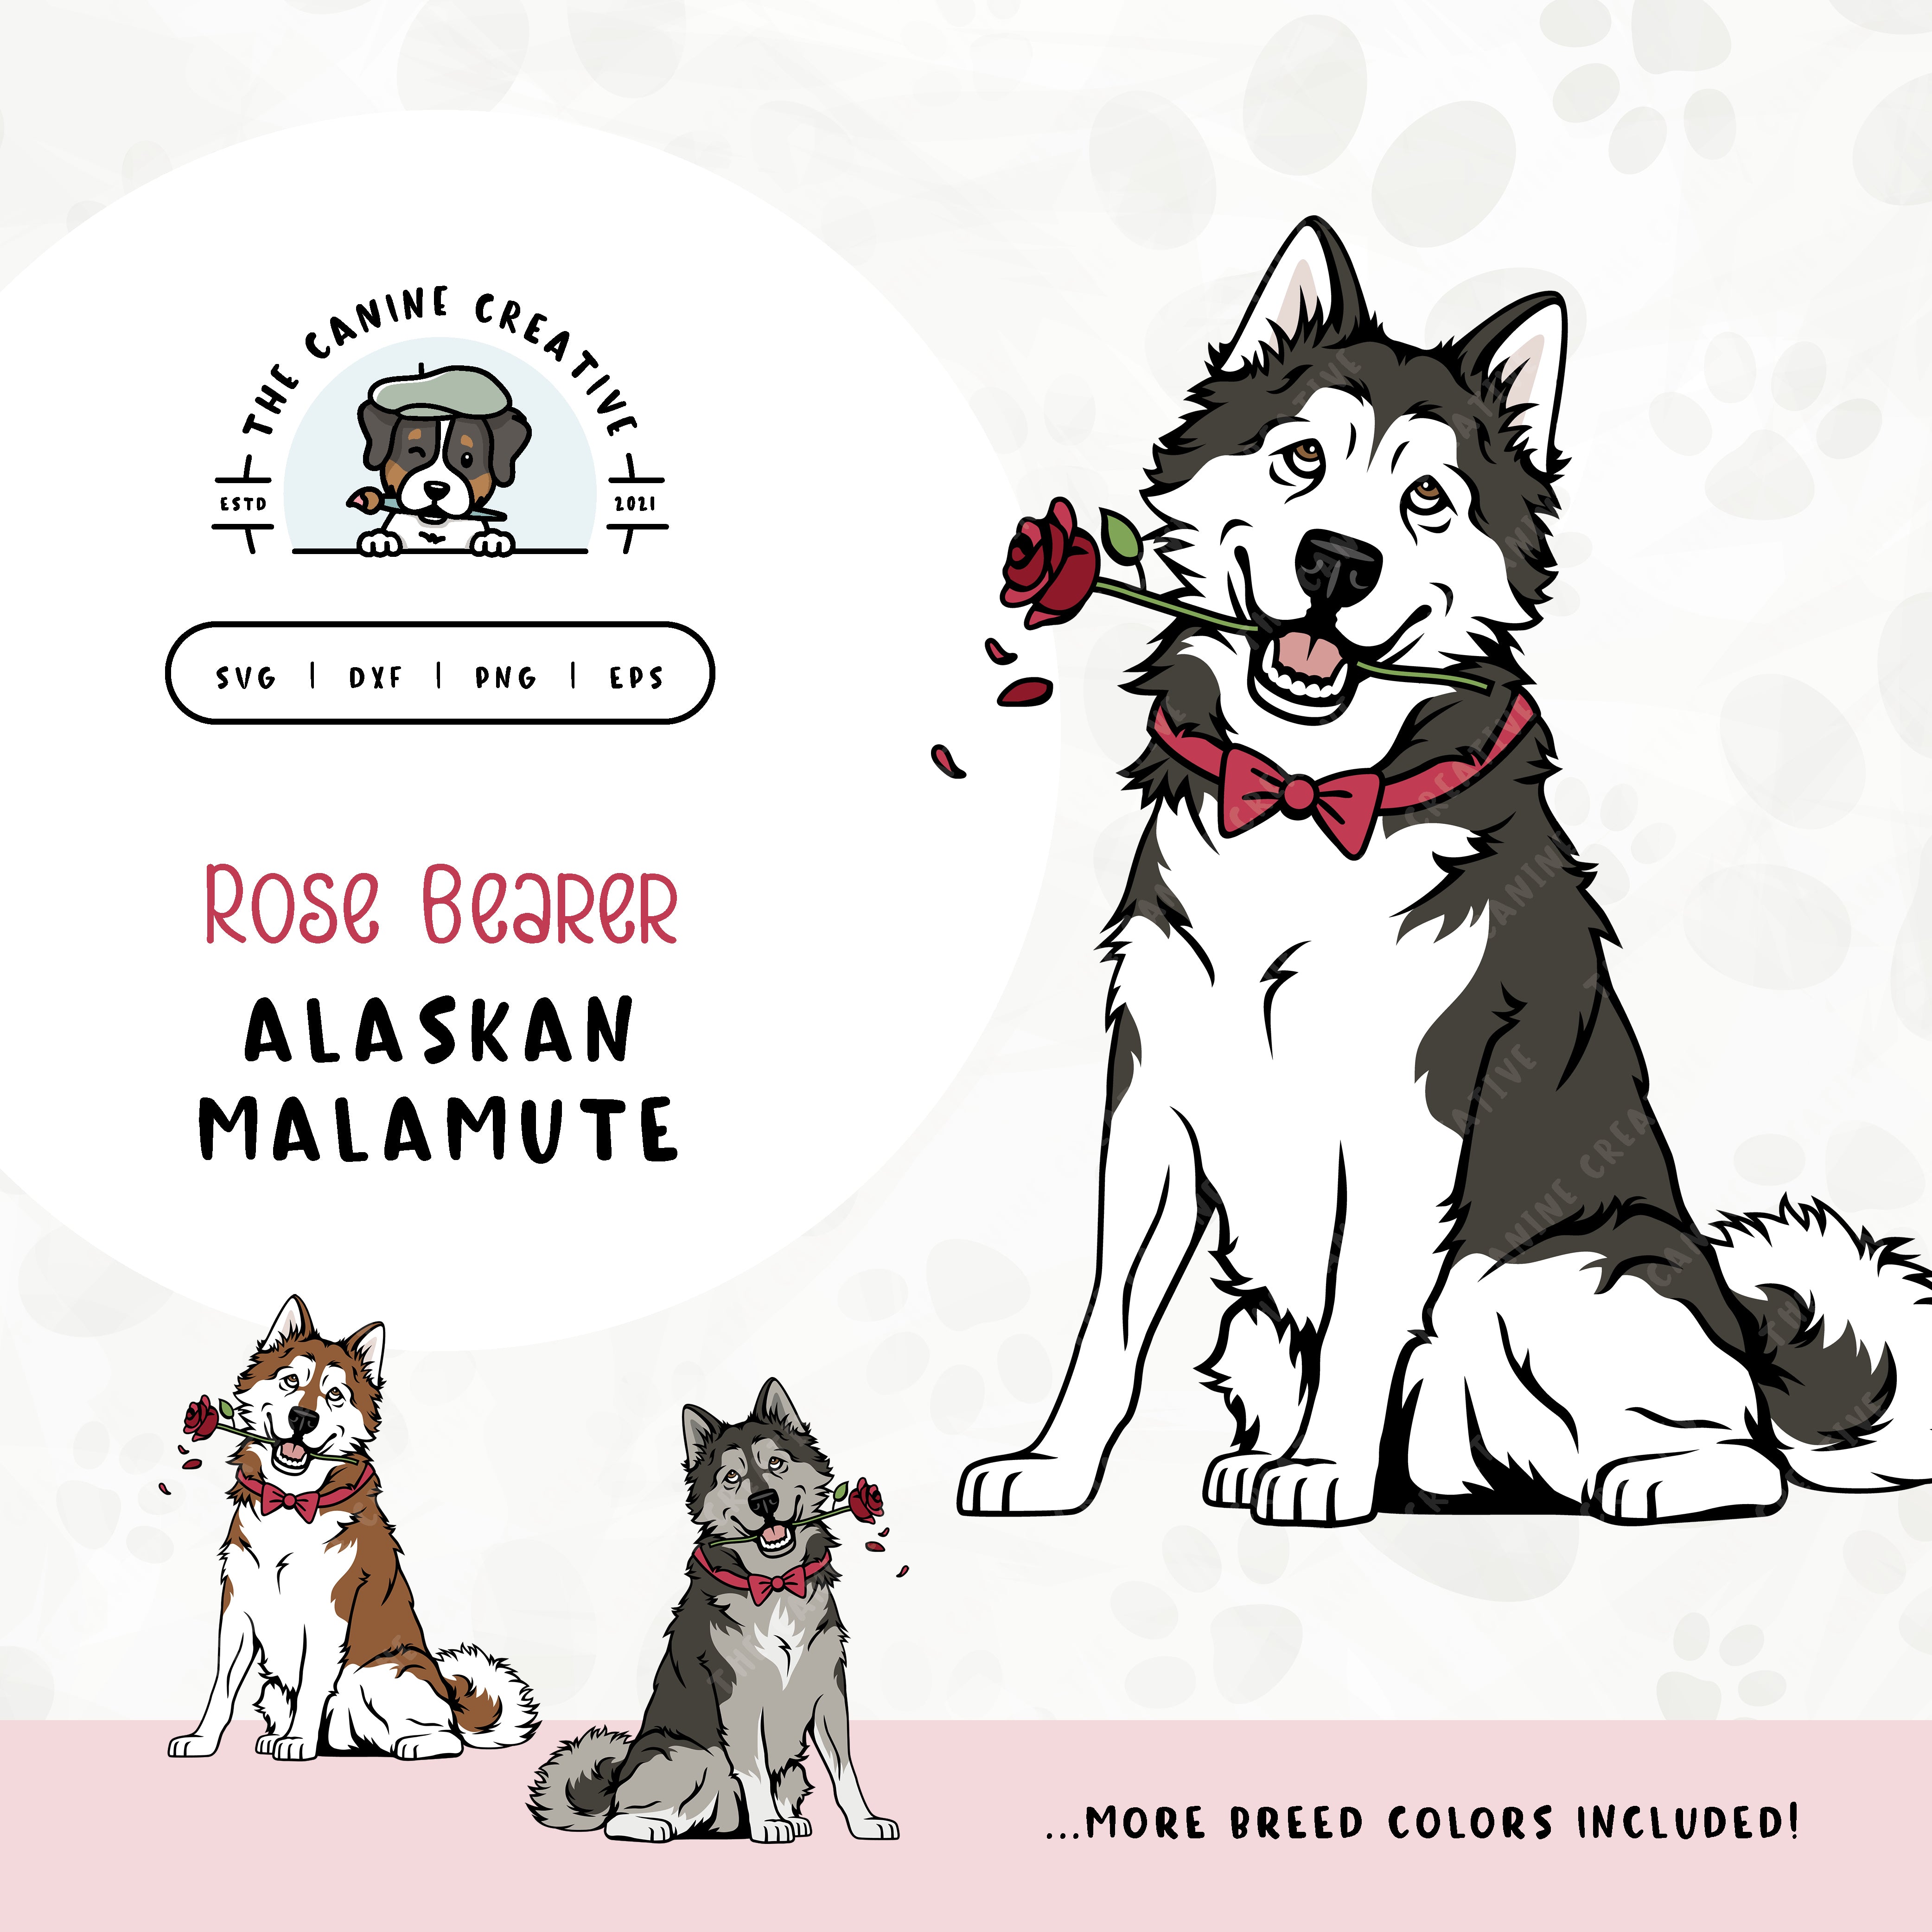 This charming illustration of an Alaskan Malamute features a dapper dog adorned with a bow-tie and holding a rose. File formats include: SVG, DXF, PNG, and EPS.